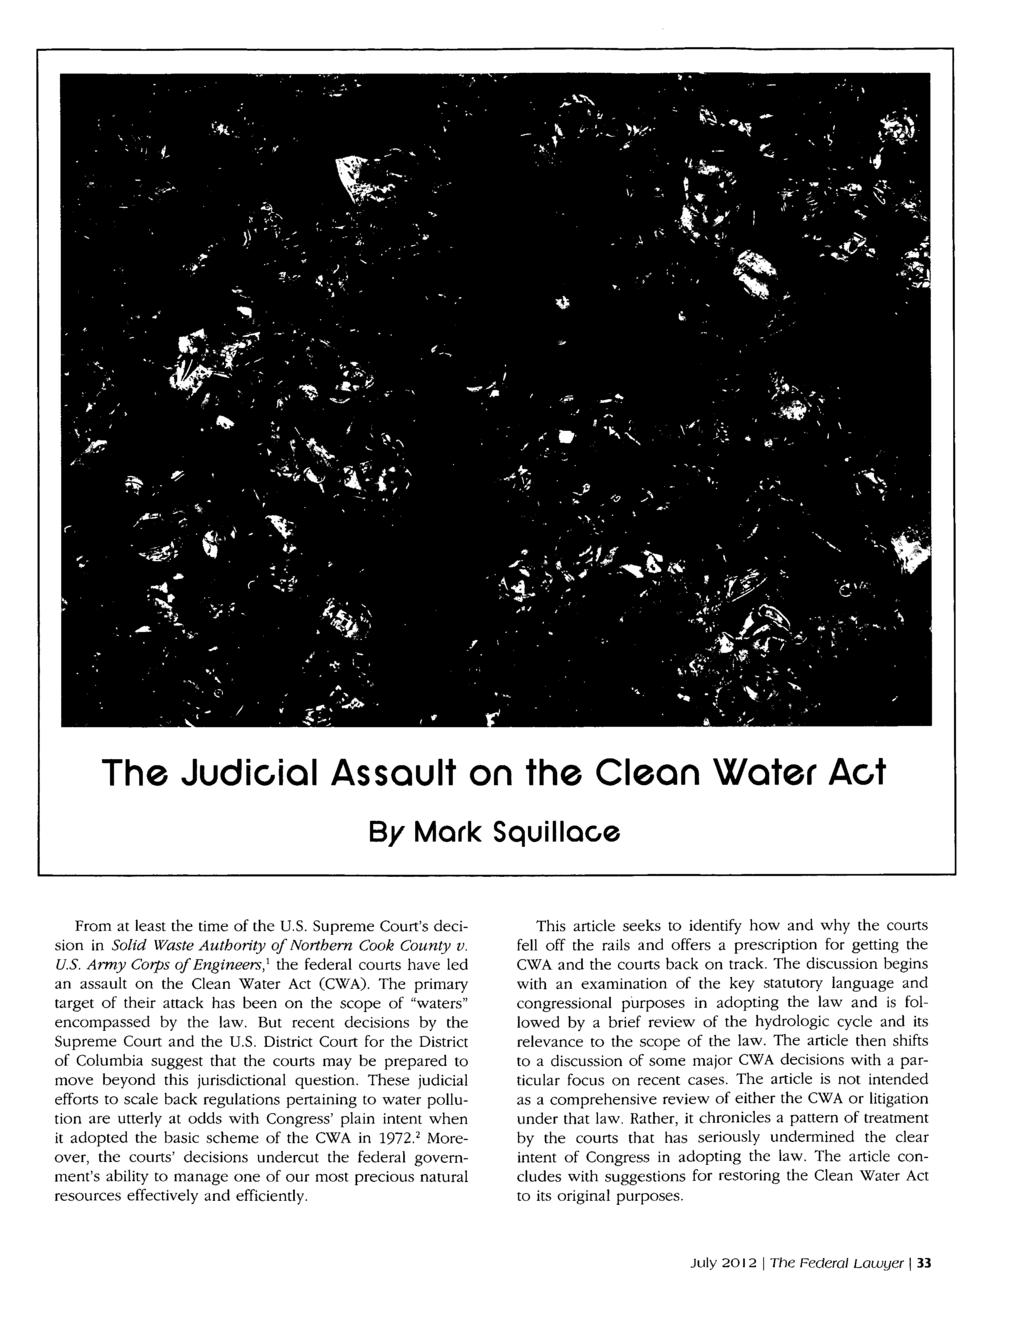 The Judicial Assault on the Clean Water Act By Mark Squillaoe From at least the time of the U.S. Supreme Court's decision in Solid Waste Authority of Northern Cook County v. U.S. Army Corps of Engineers,' the federal courts have led an assault on the Clean Water Act (CWA).